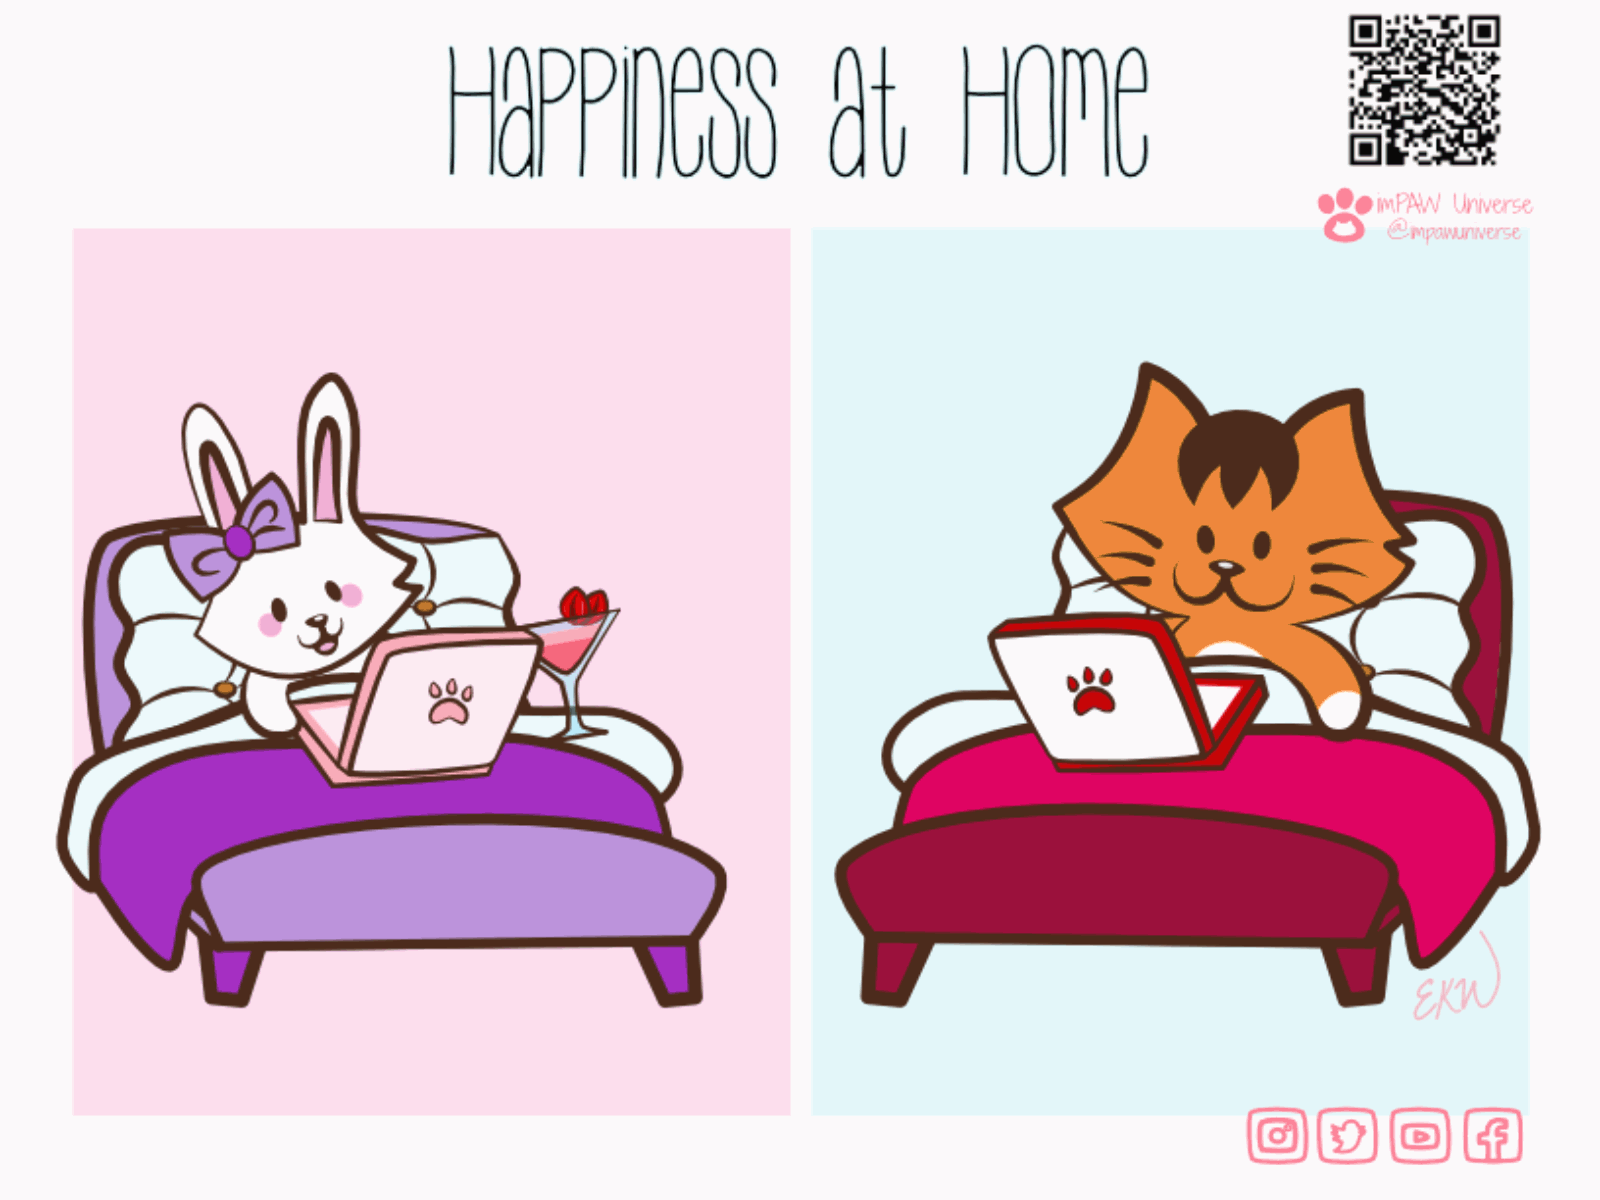 imPAW Universe Kiko & Friends: Happiness at Home by I M PAW Universe- Pop |  Contemporary | Cartoon | Media Art on Dribbble